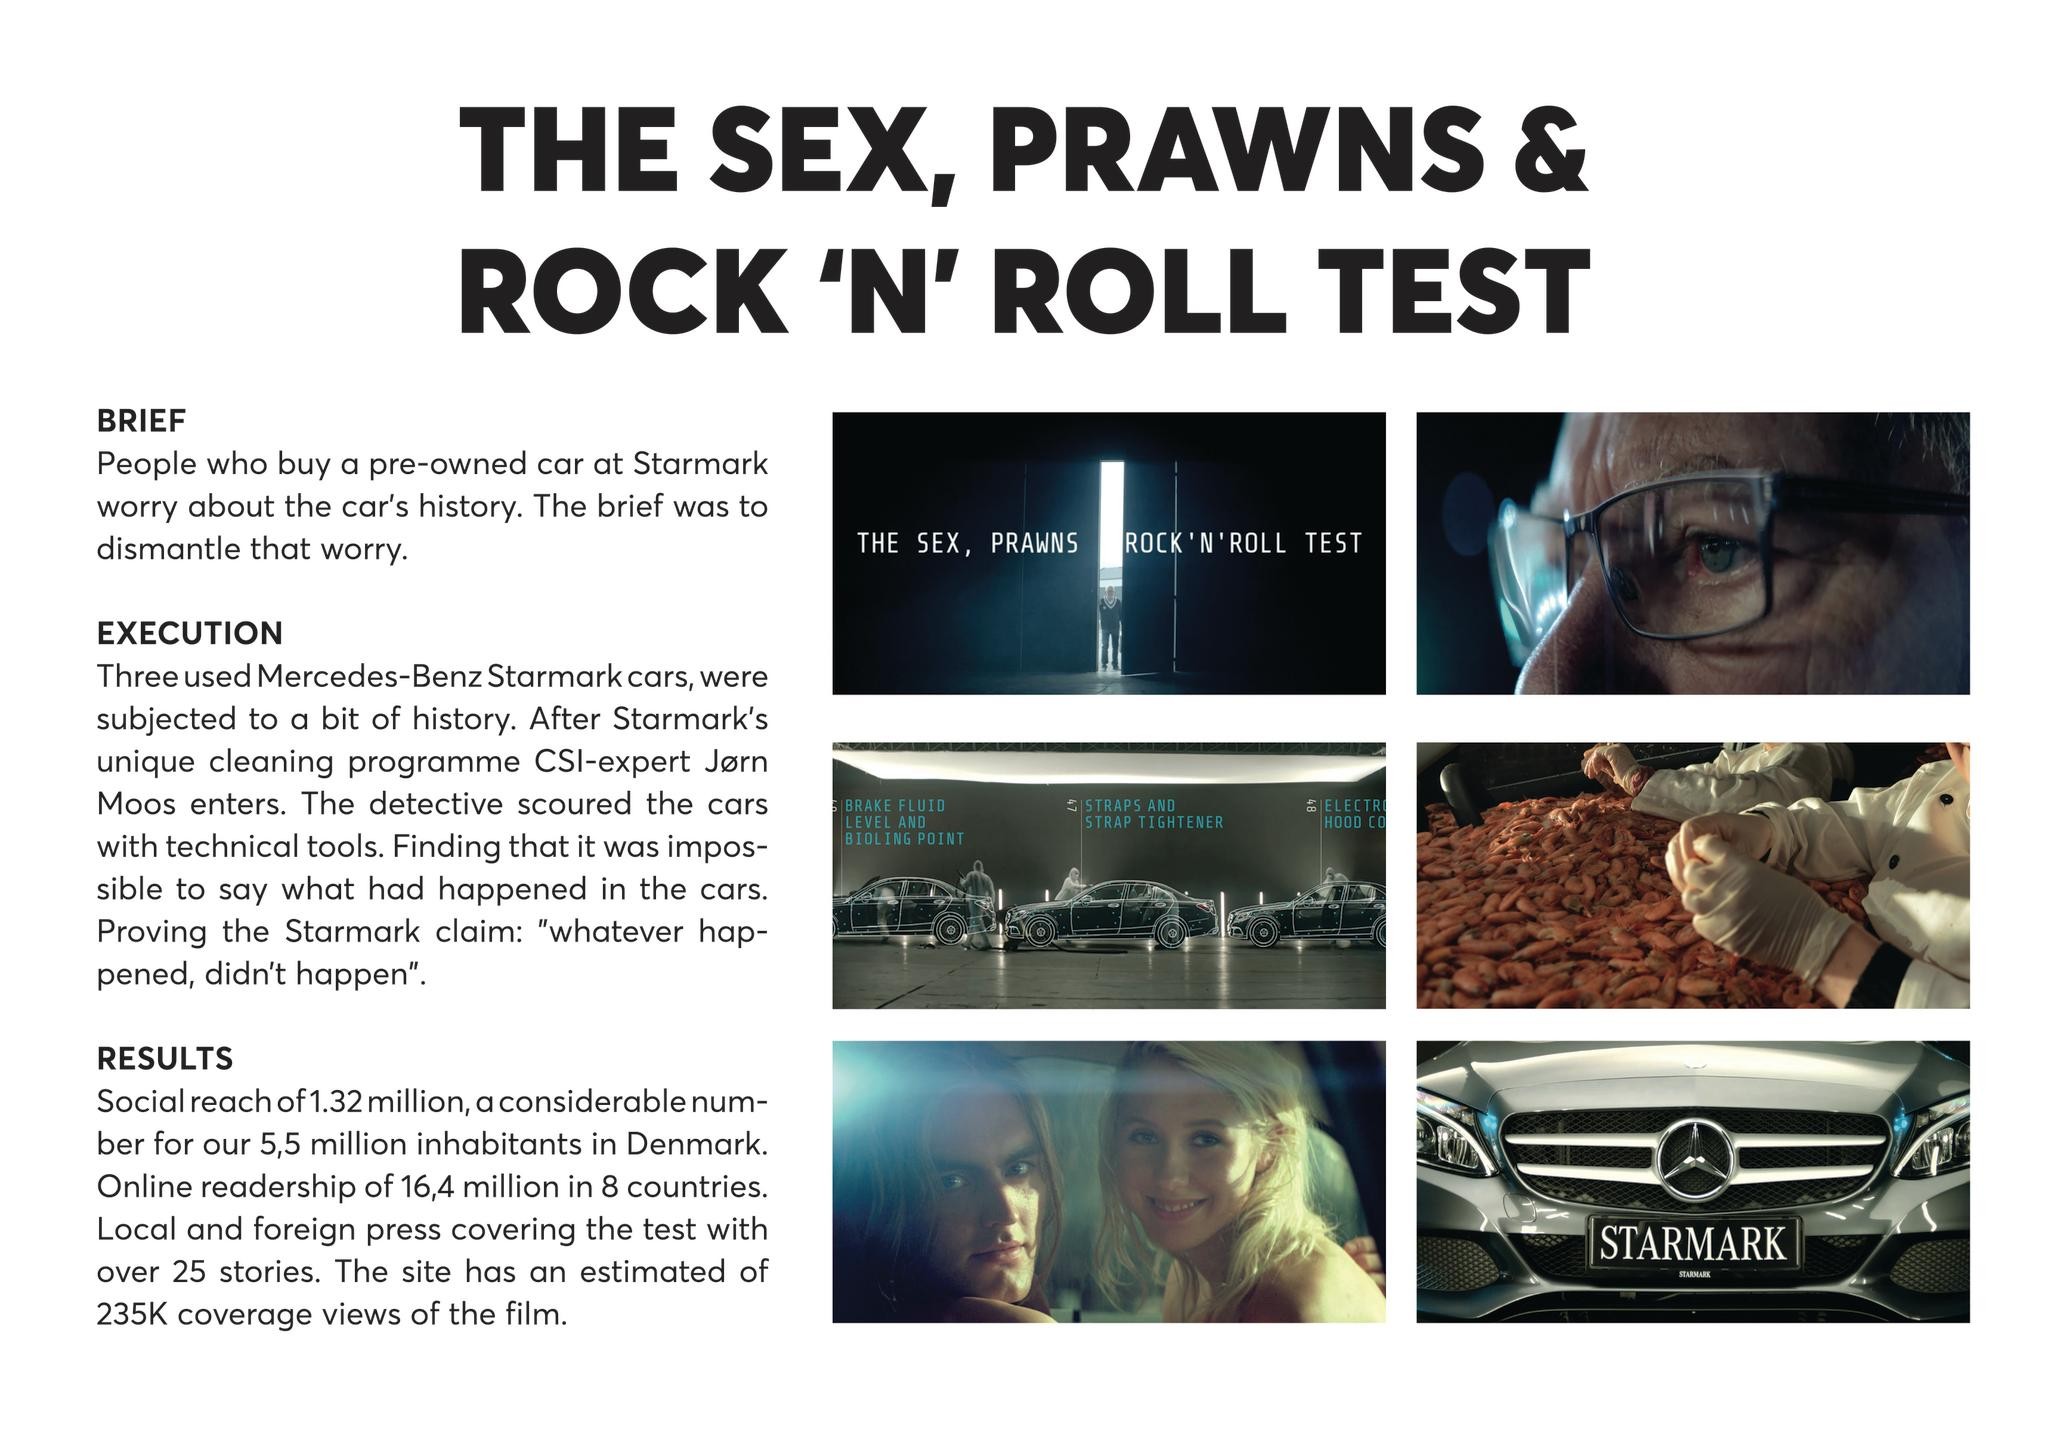 The Sex, Prawns and Rock'n'Roll test